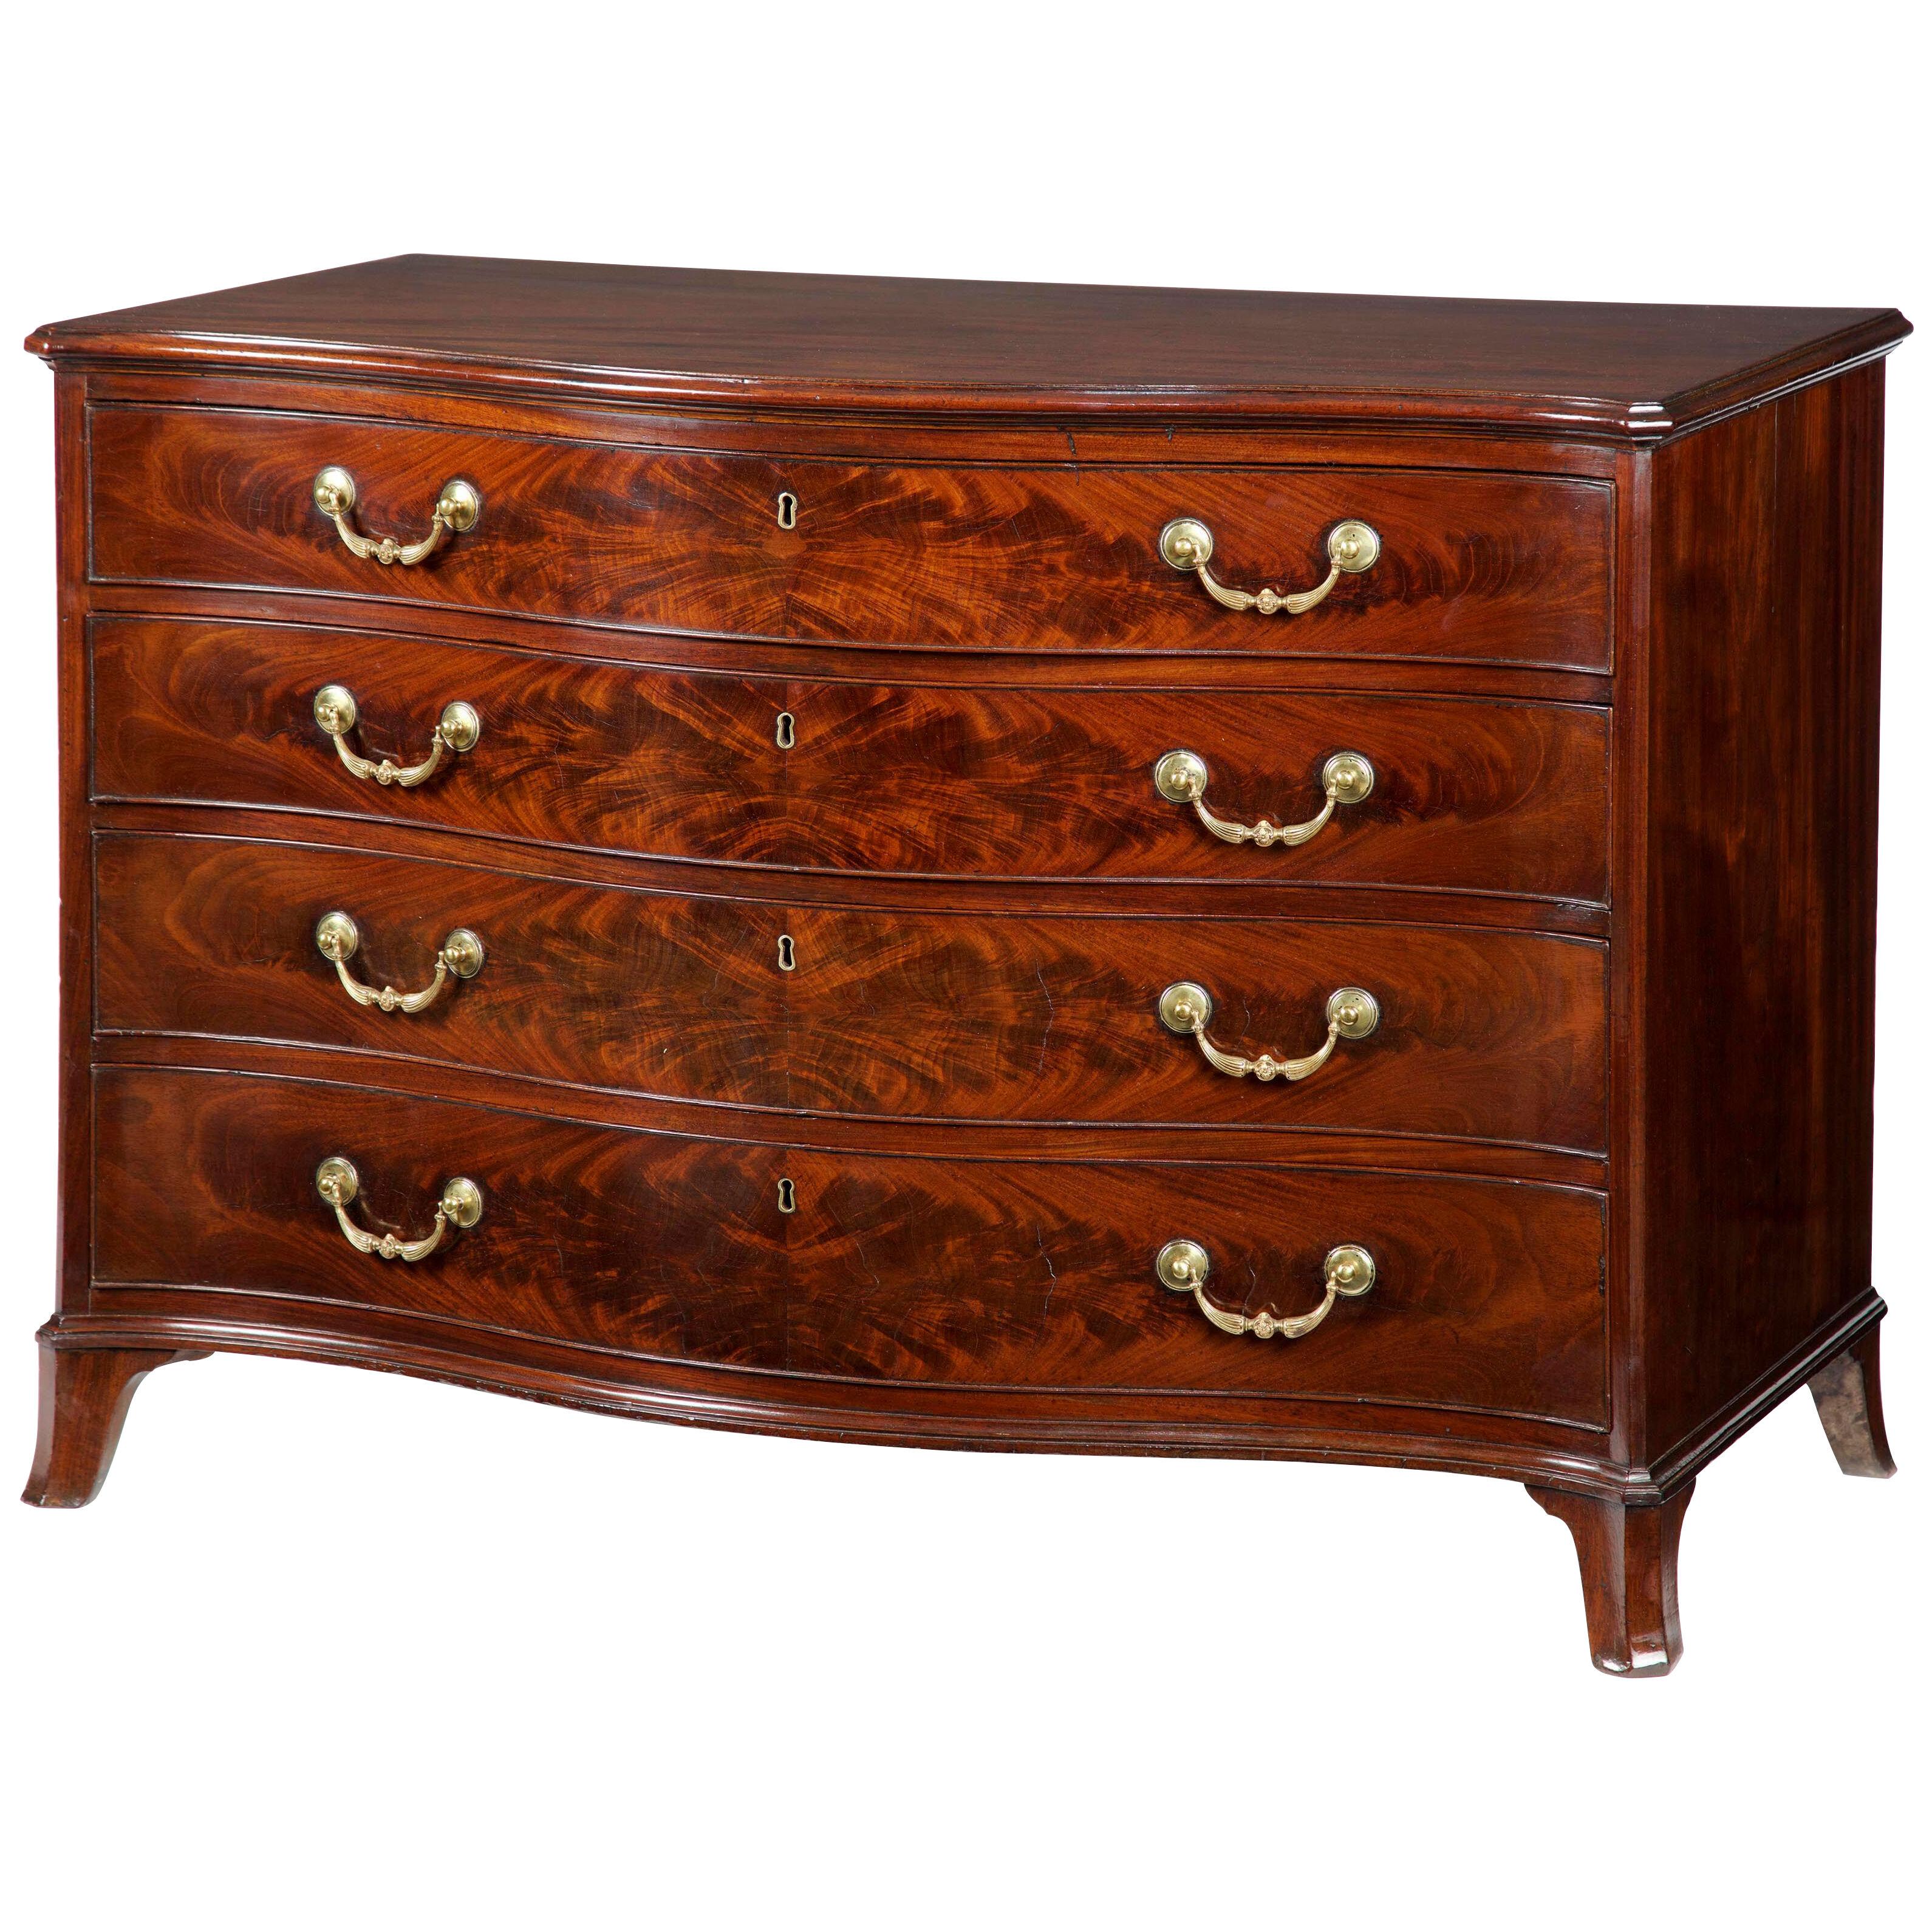 George III mahogany serpentine commode attributed to Gillows of Lancaster